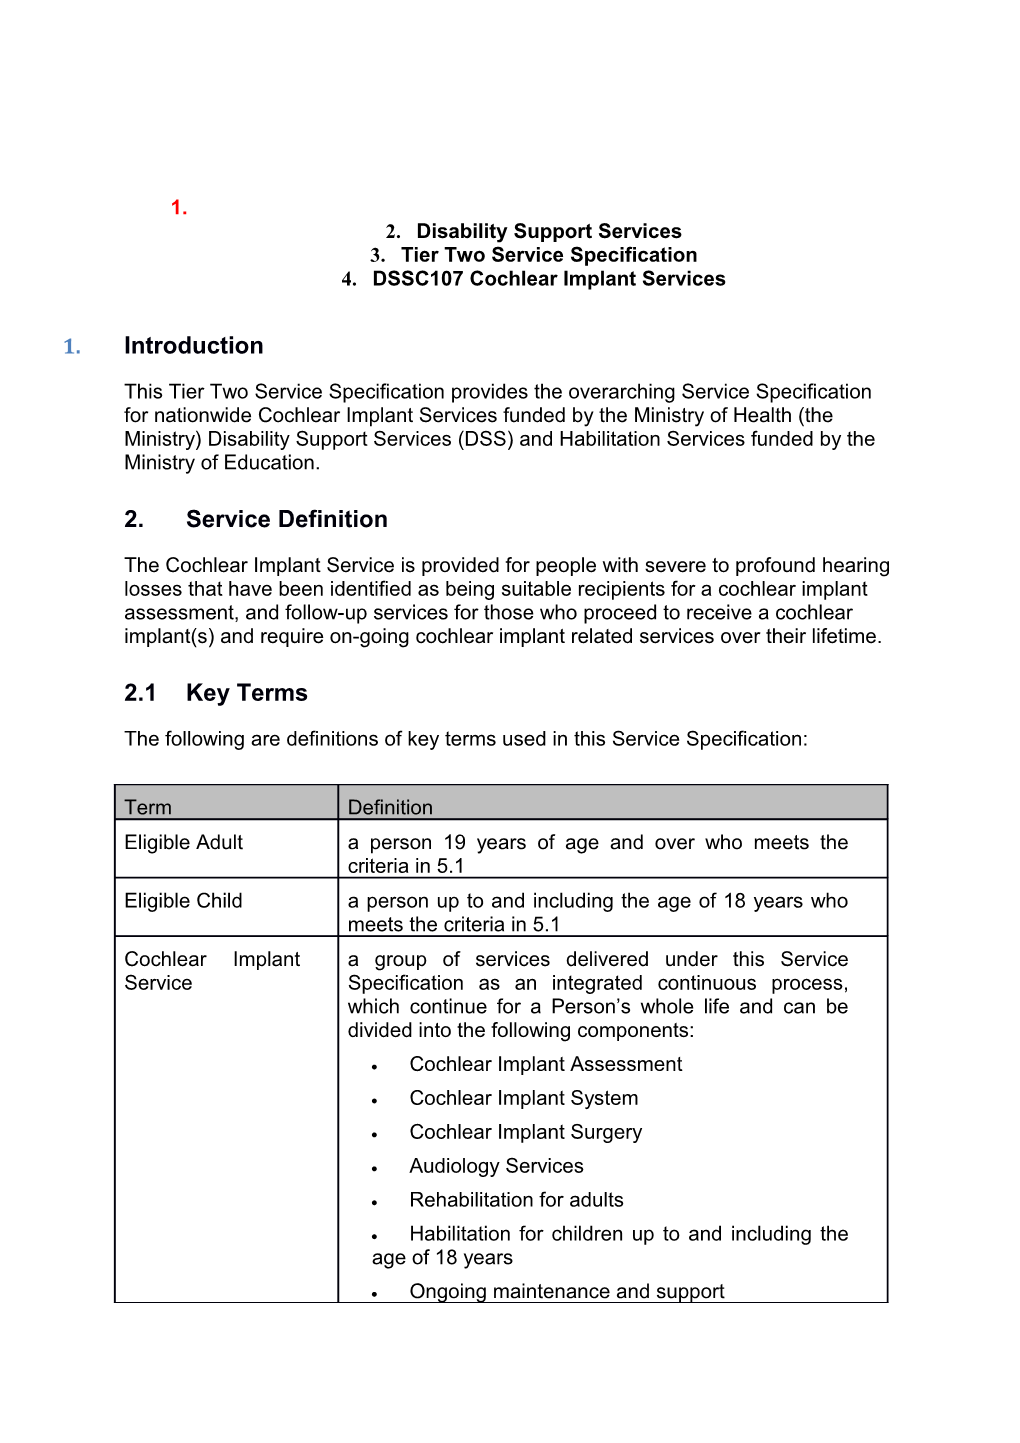 Disability Support Services Tier Two Service Specification - DSSC107 Cochlear Implant Services